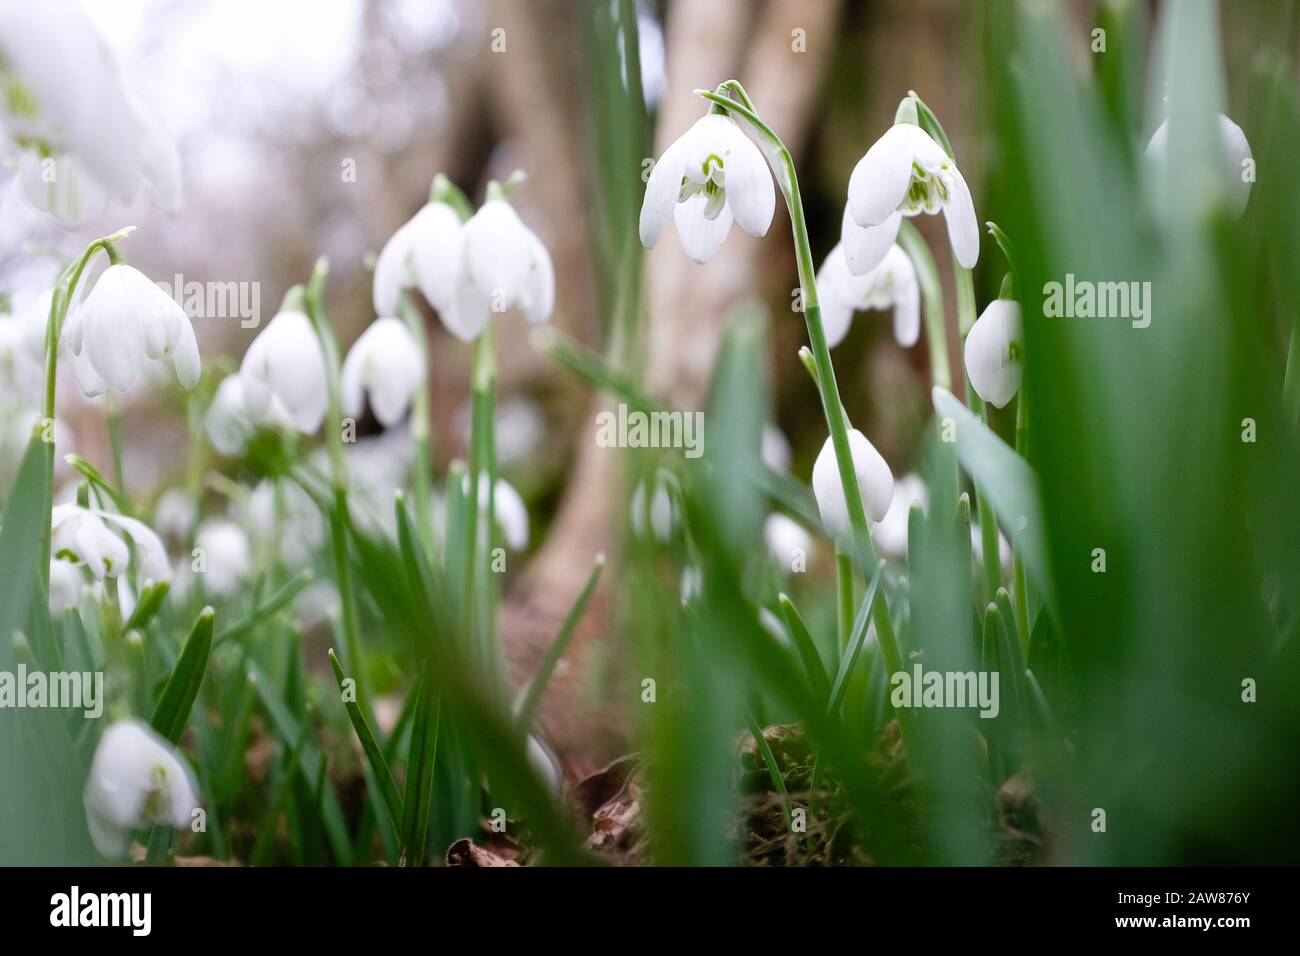 Close up of wild outdoor flowering plants Stock Photo